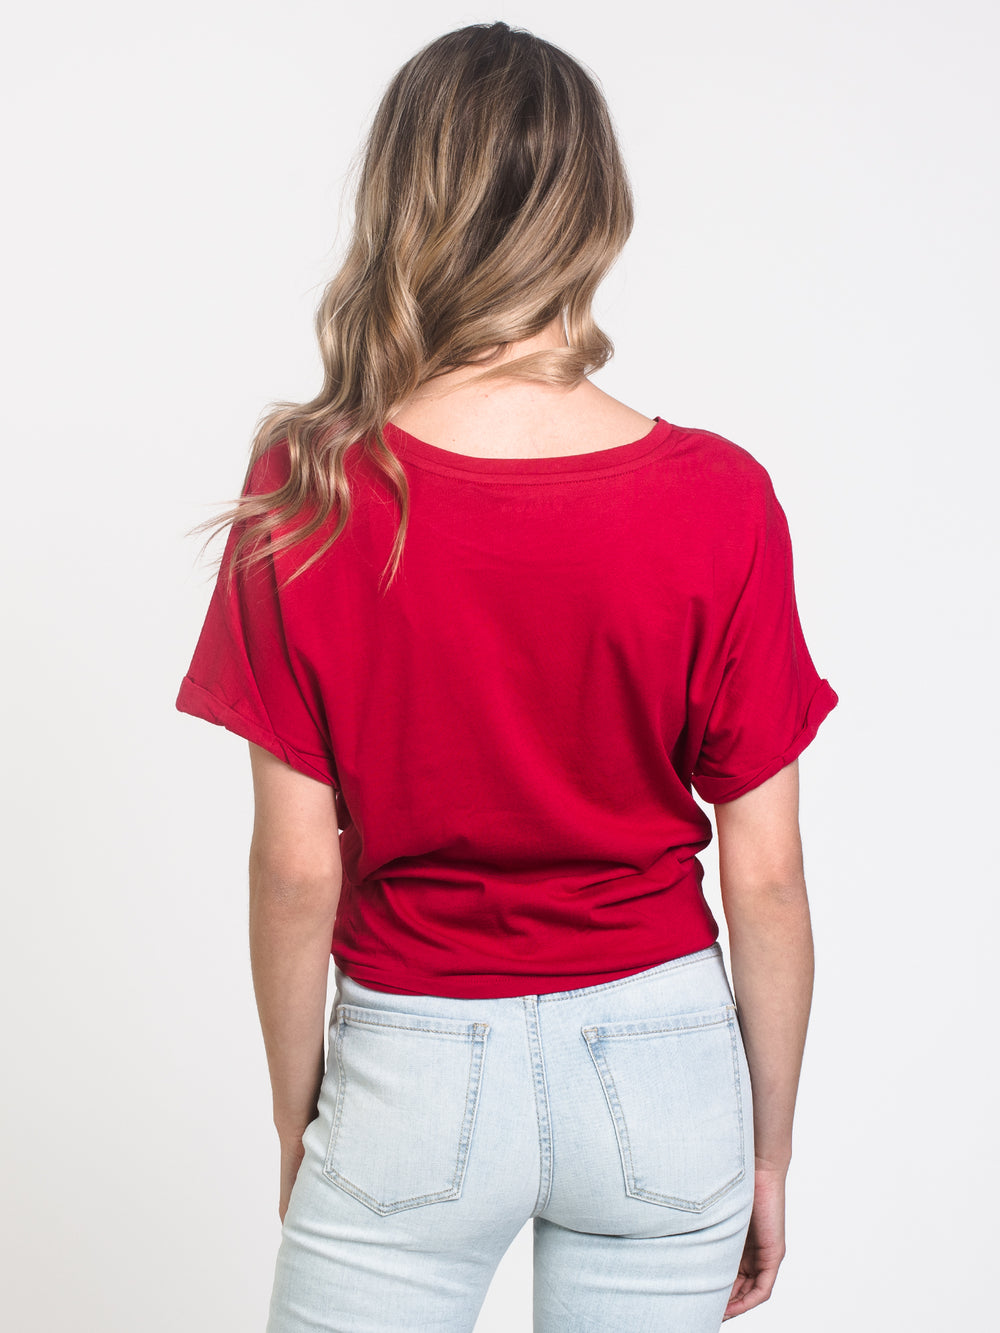 WOMENS LAYLA KNOTTED TEE - CLEARANCE